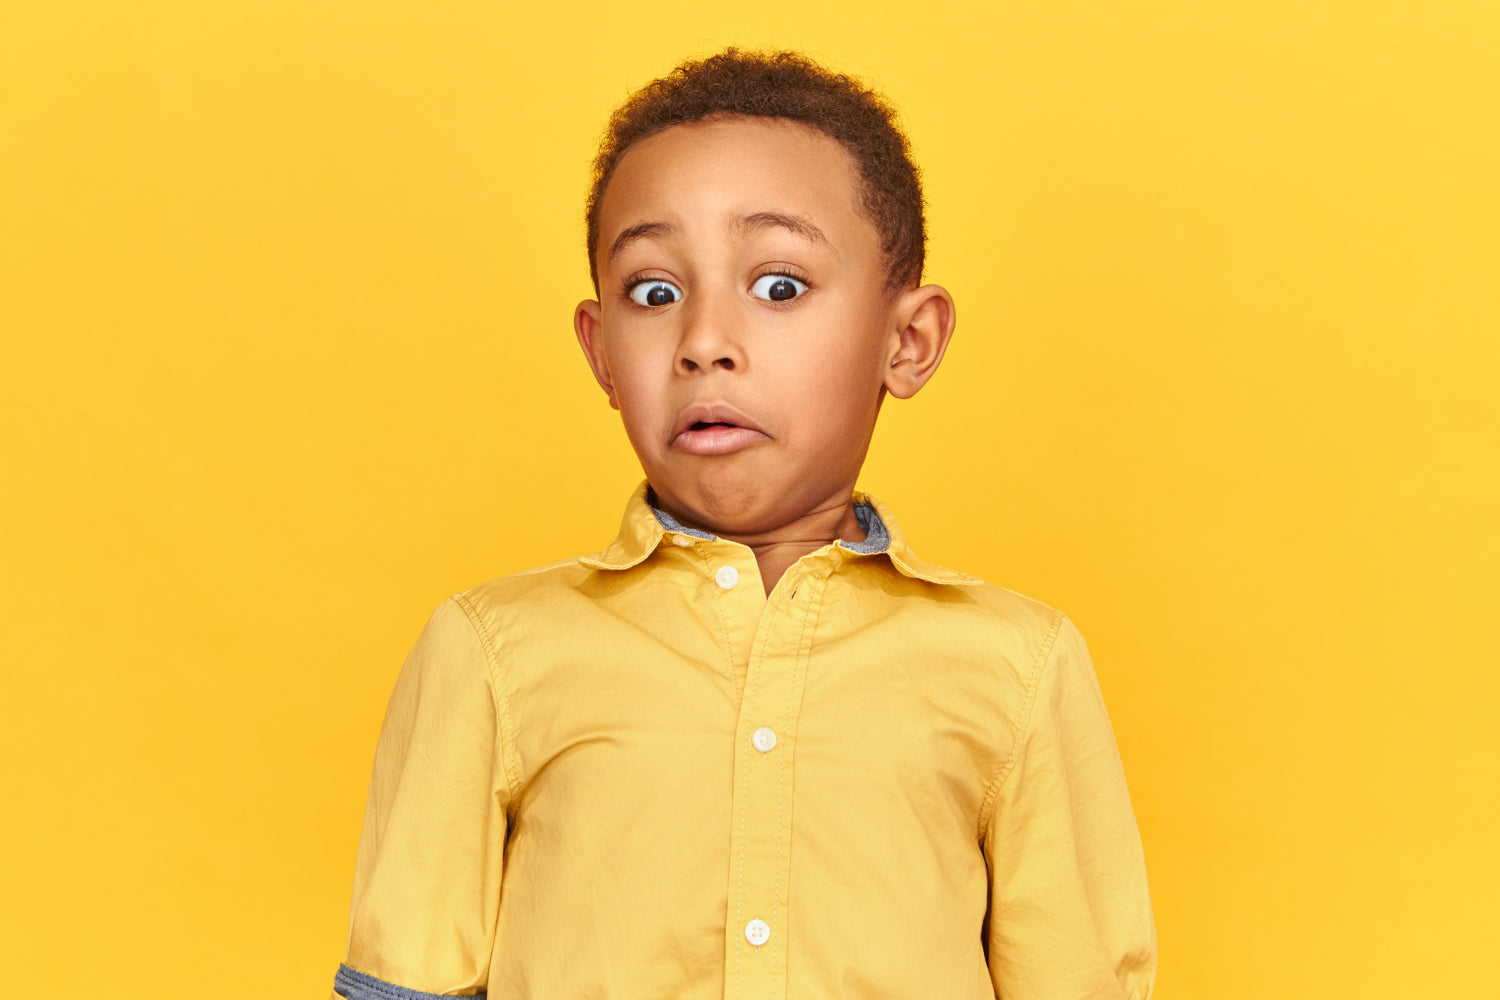 Picture of child on yellow background looking surprised to illustrate online resources for youth emotional support